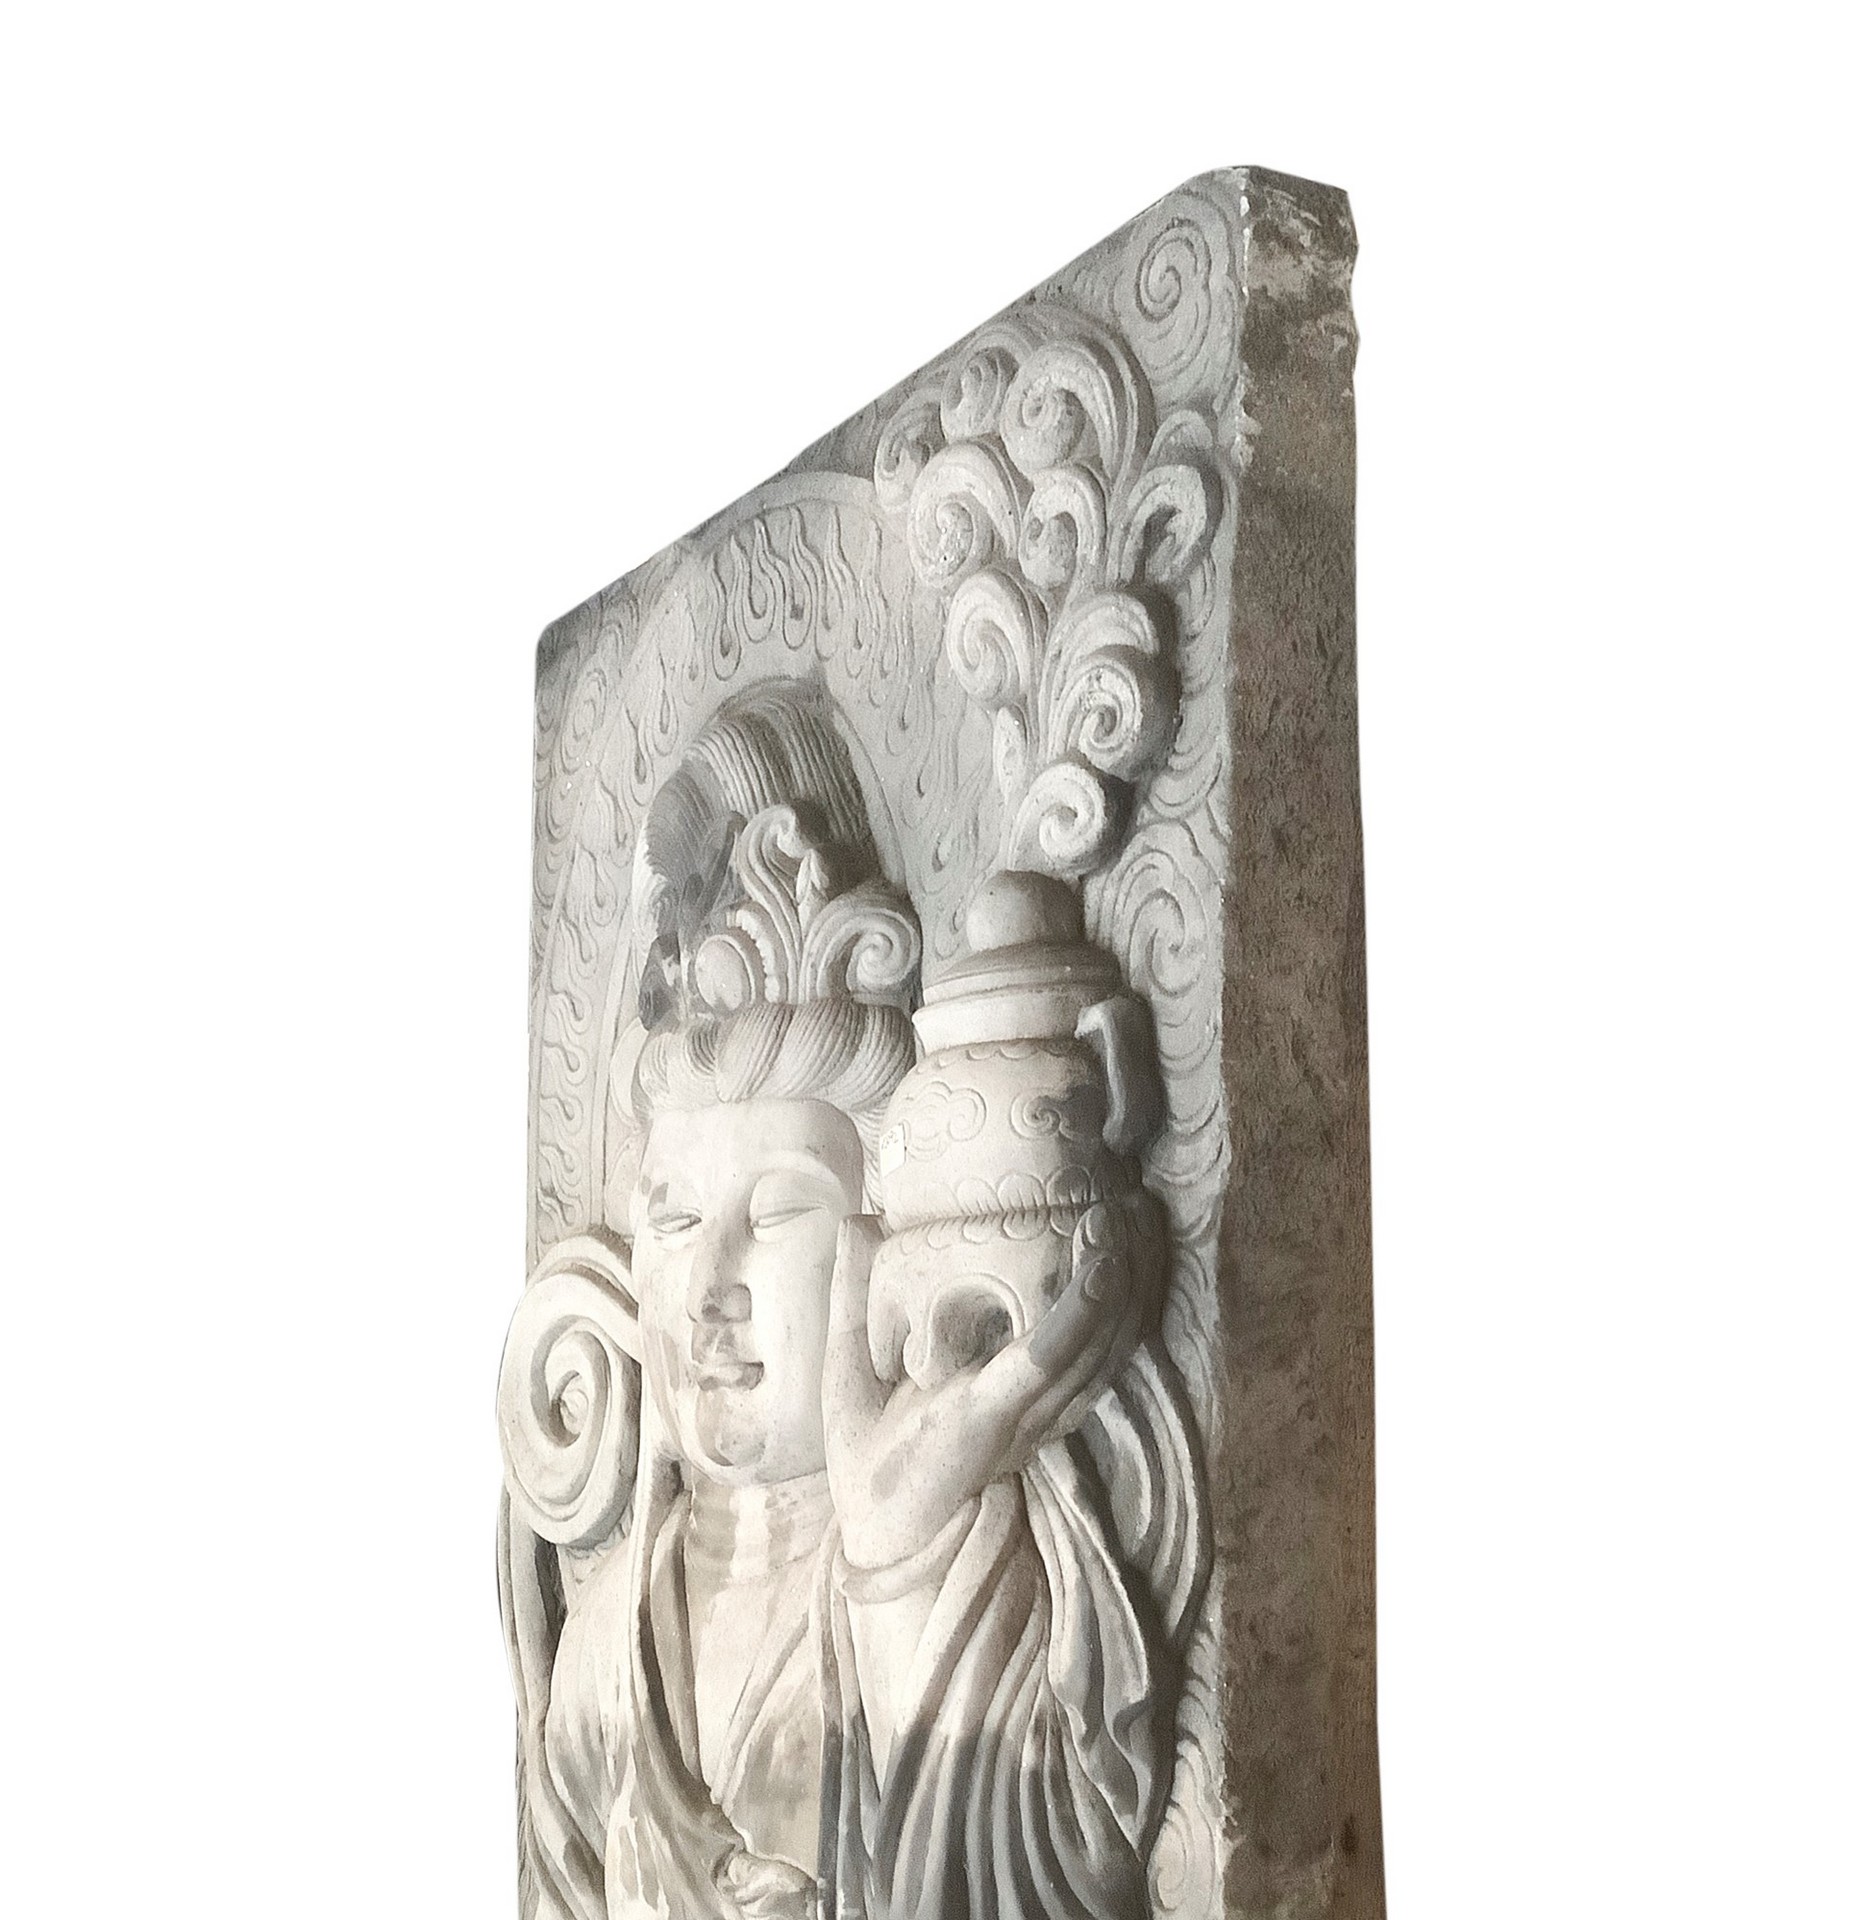 Bas-relief sculpture of Buddha on a marble slab, Early 19th century - Image 5 of 5